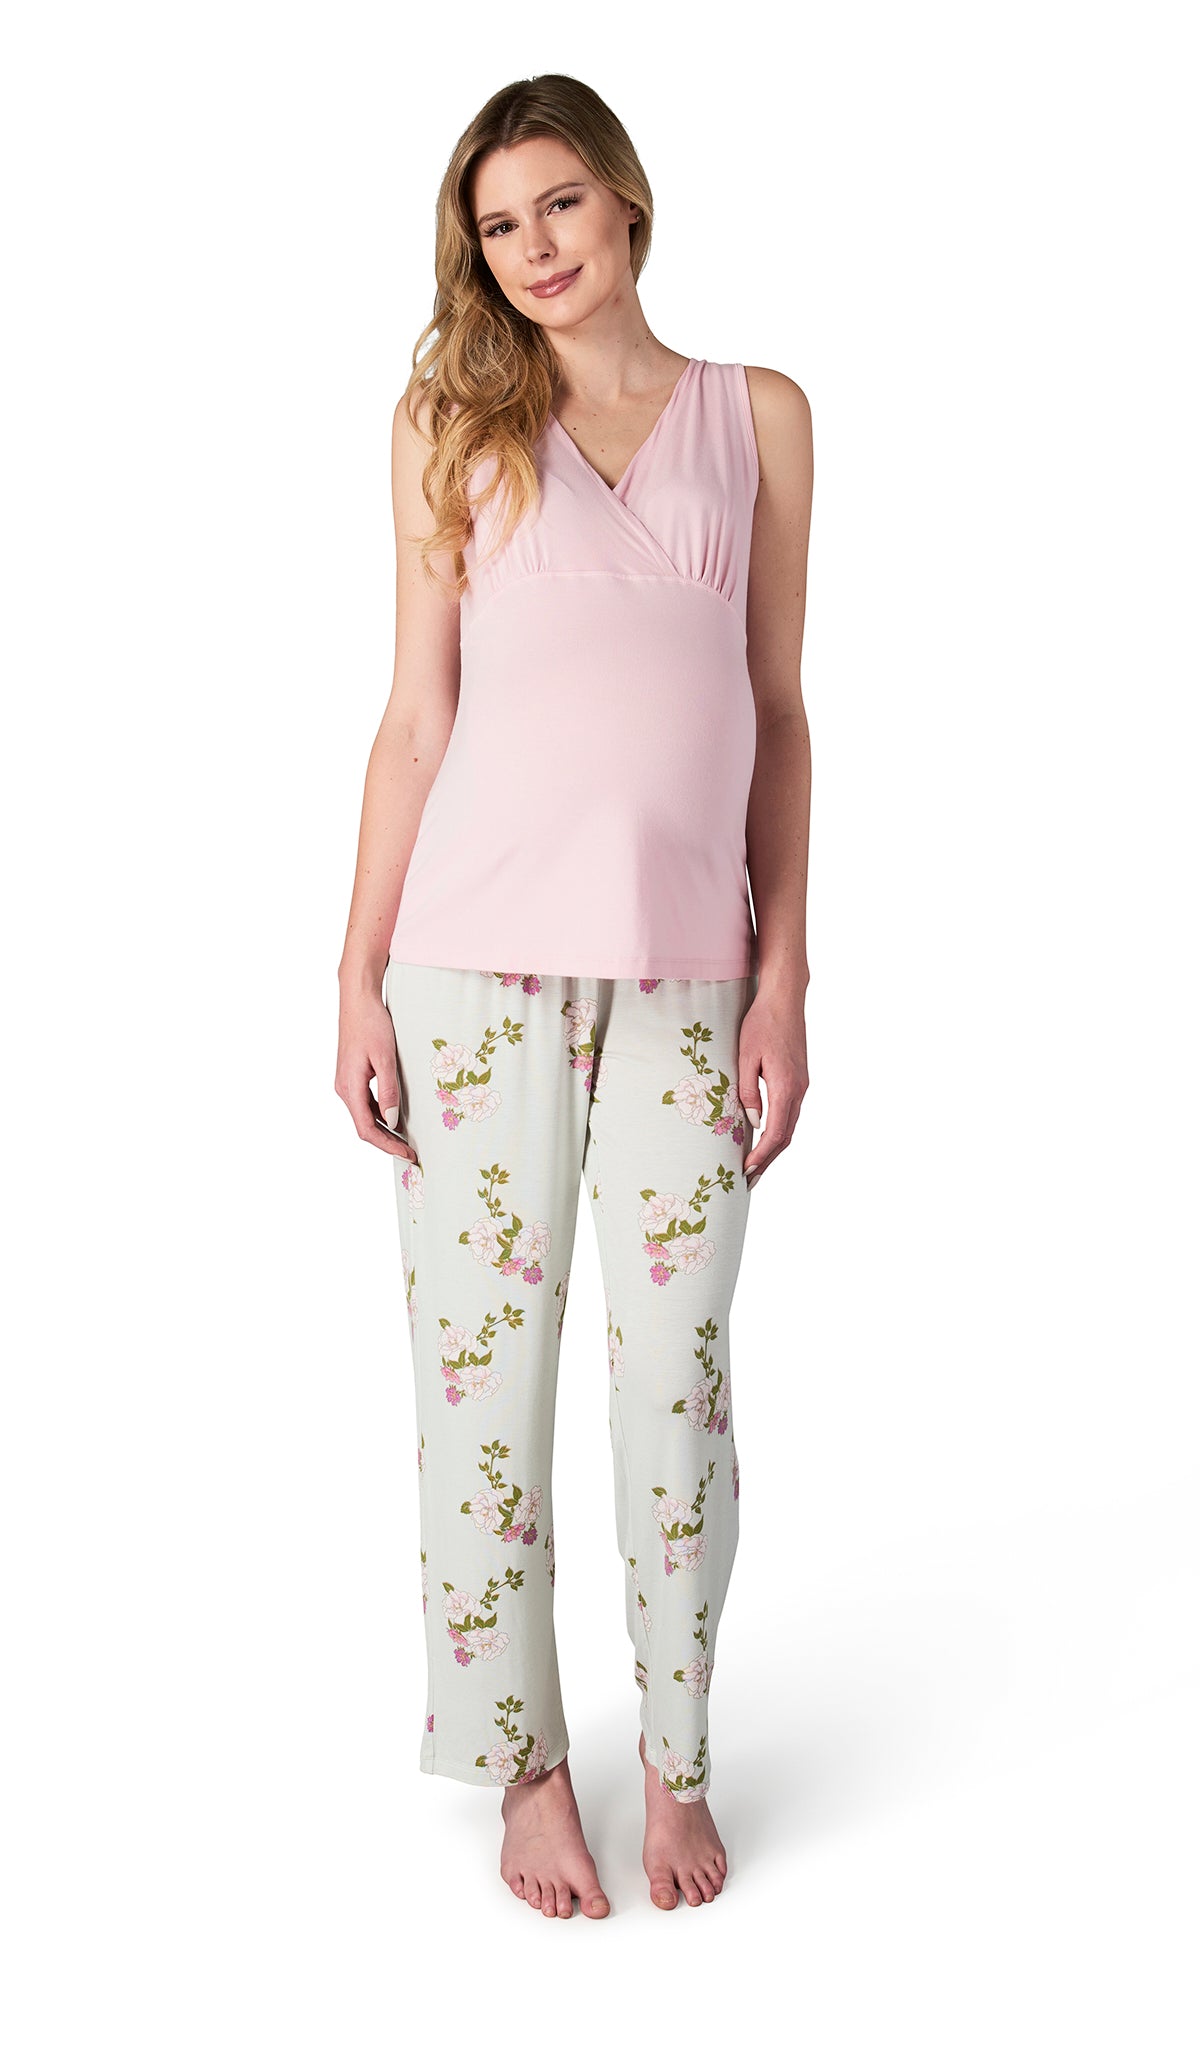 Peony Analise 3-Piece Set, pregnant woman wearing criss-cross bust tank top and pant.